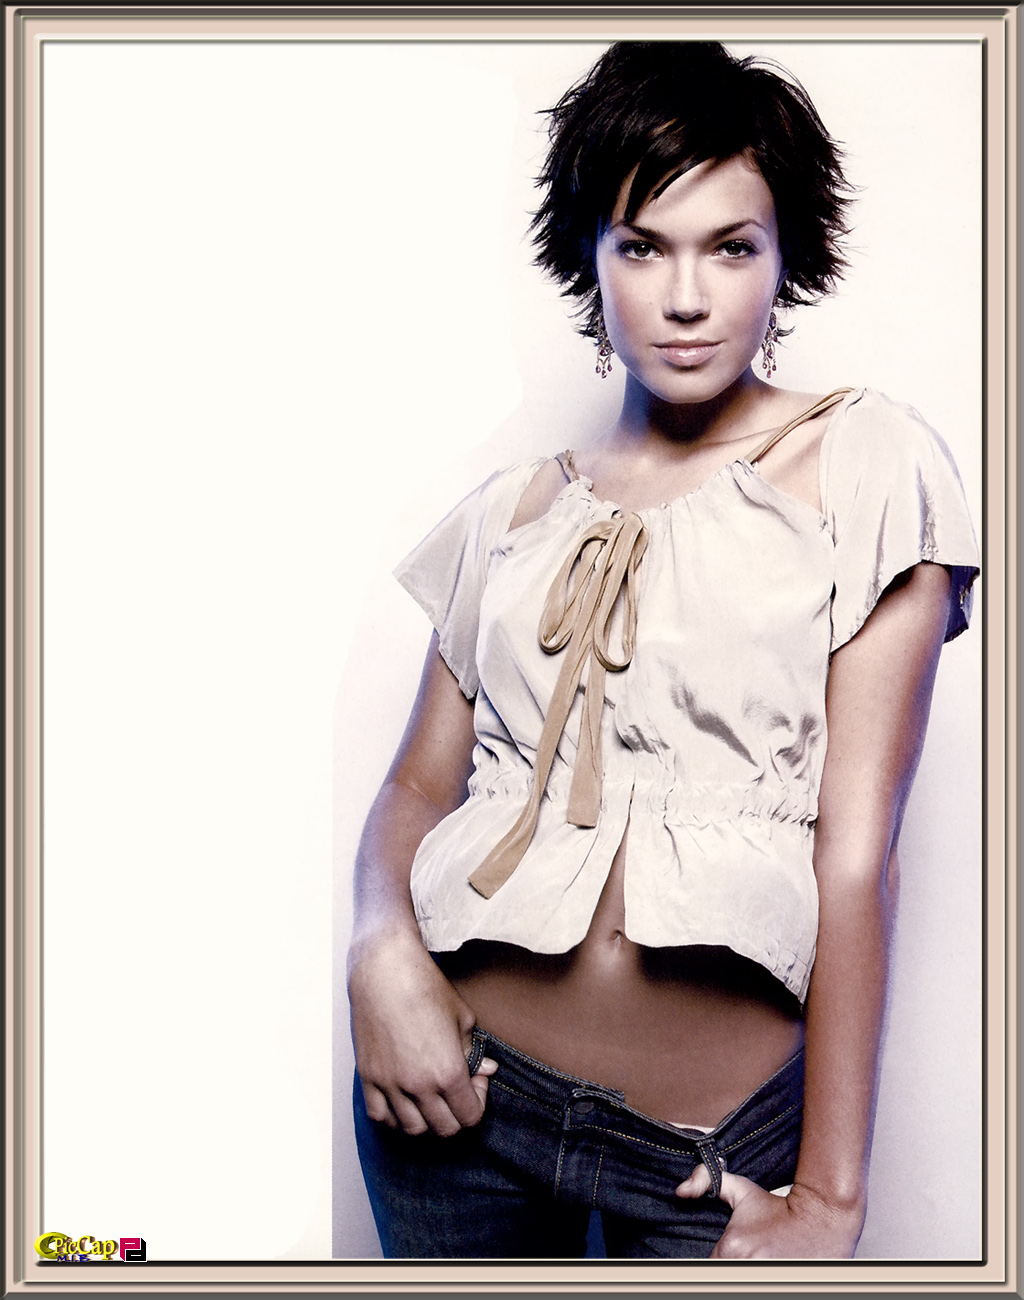 Mandy Moore photo 14 of 1119 pics, wallpaper - photo #5874 - ThePlace2